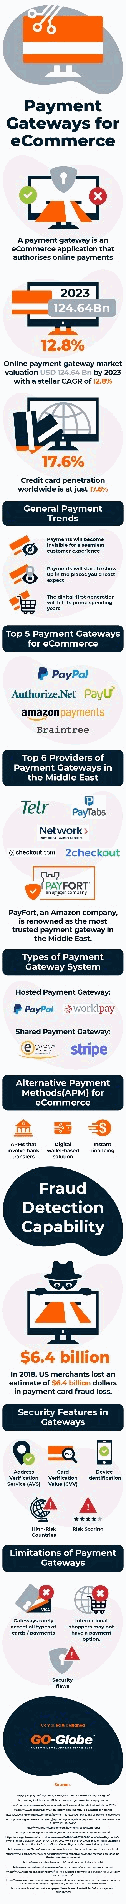 Payment gateways for eCommerce [Infographic]